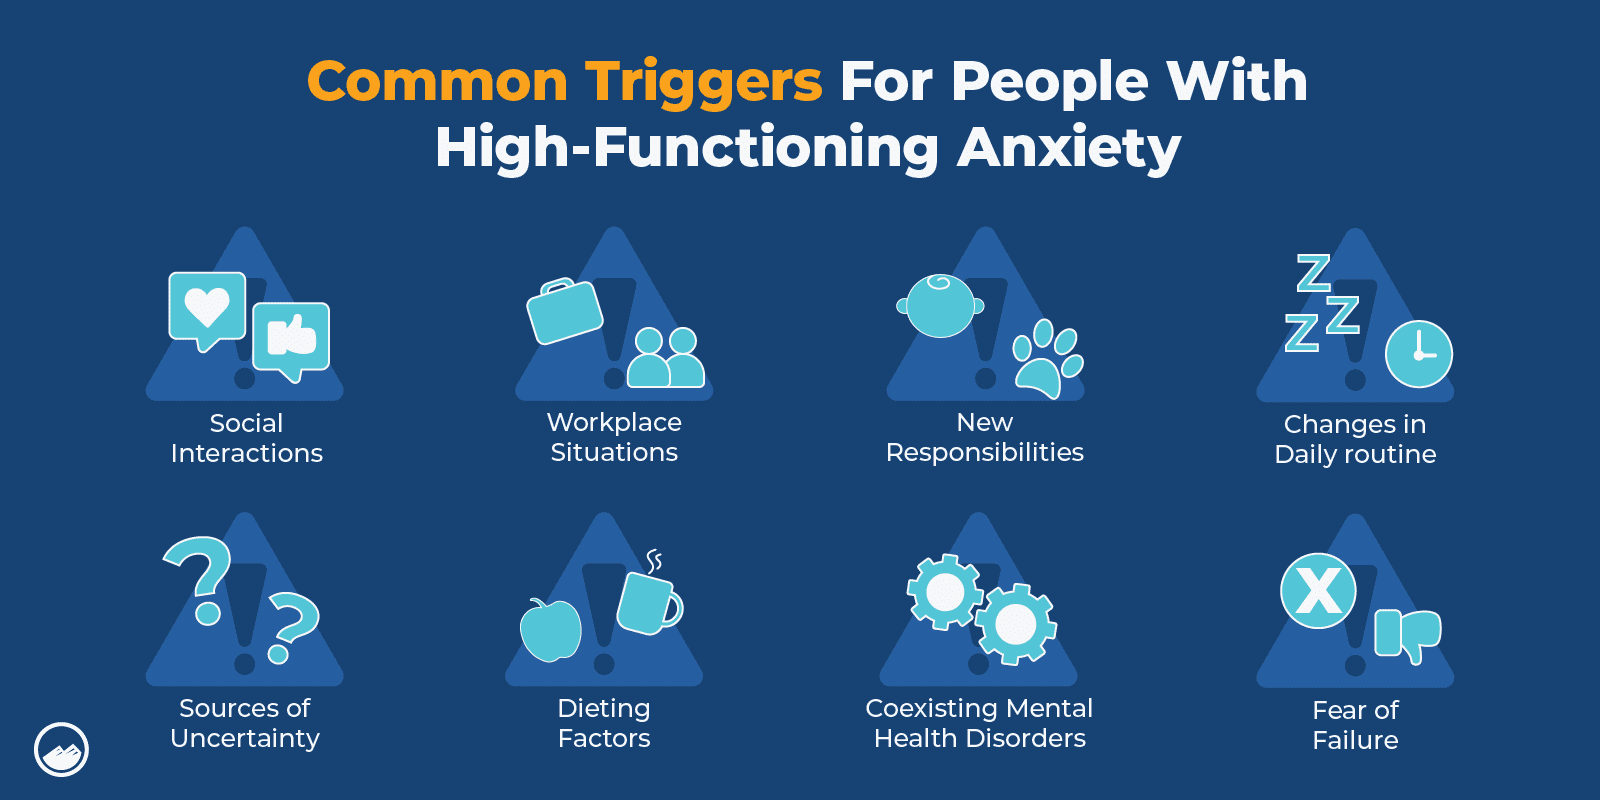 High-Functioning Anxiety Graphics 2 Common Triggers For People With High-Functioning Anxiety